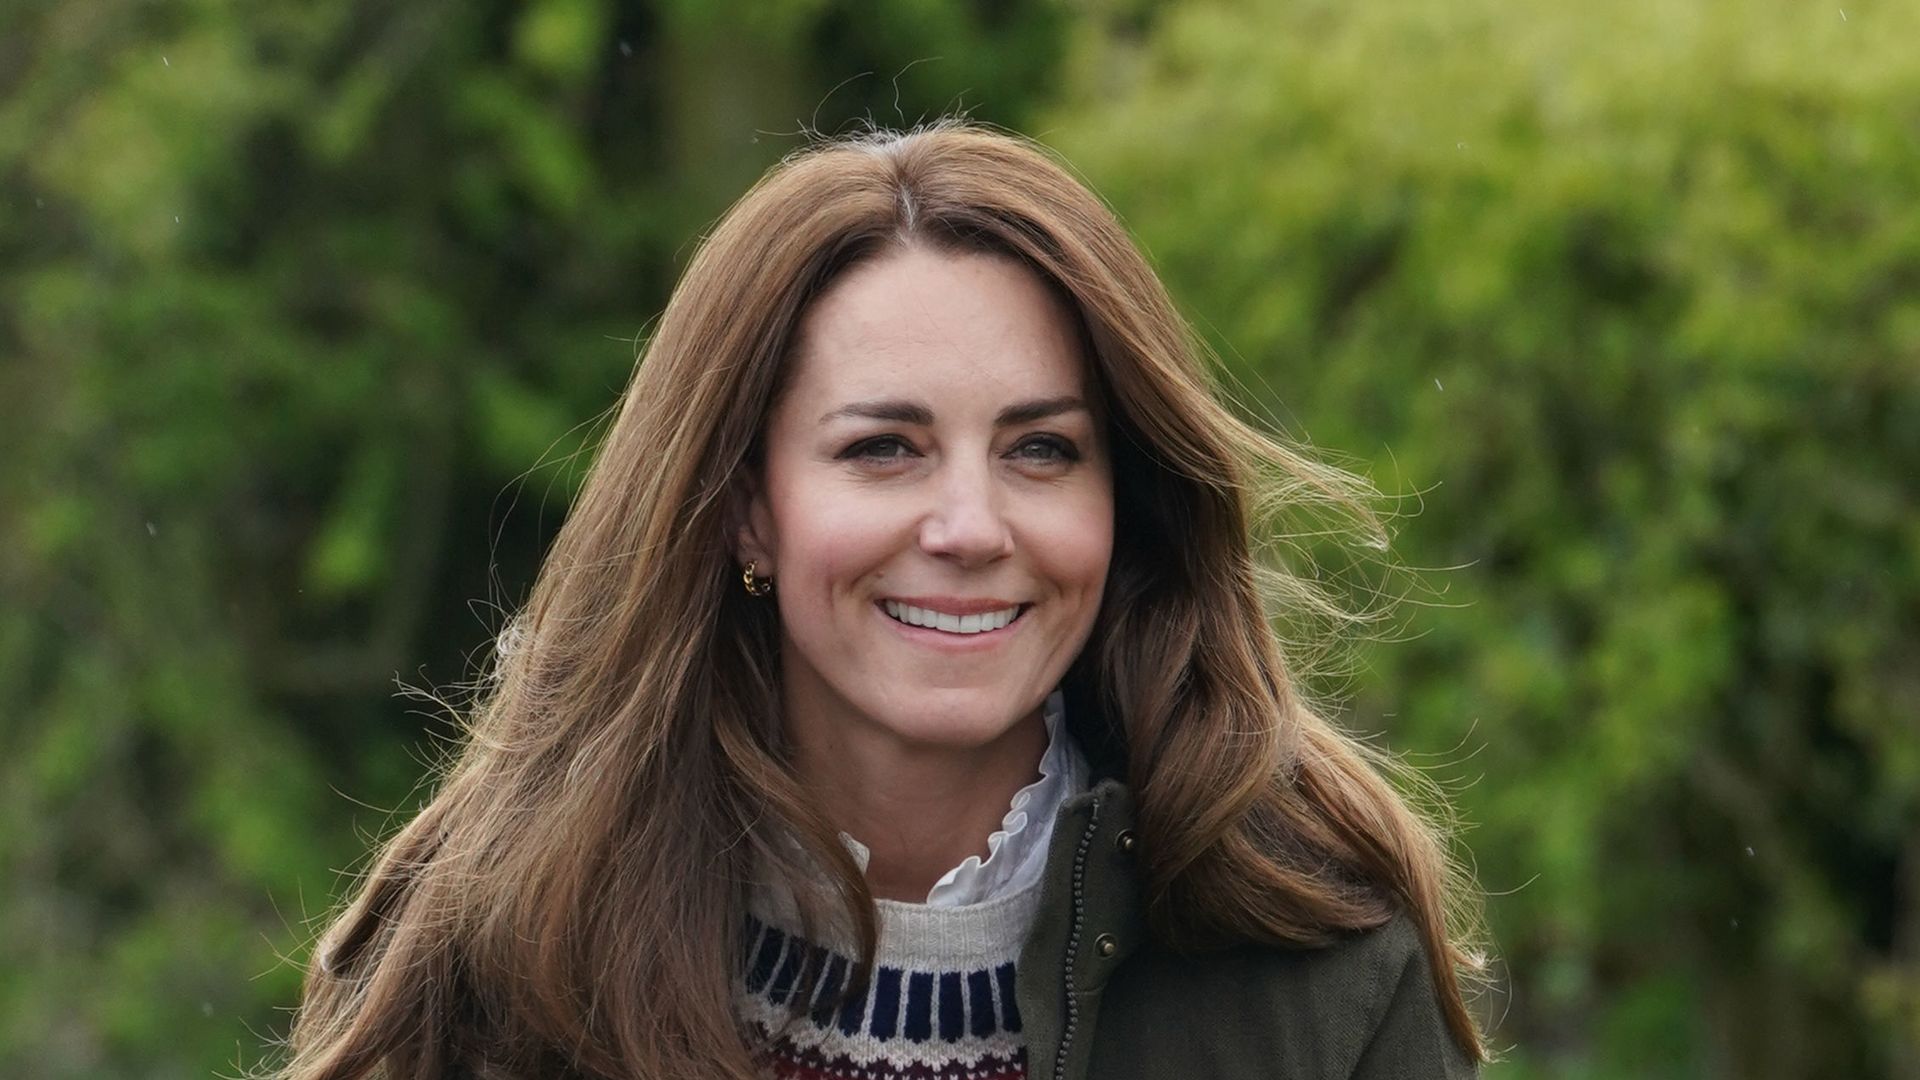 Catherine, Duchess of Cambridge during a visit to Manor Farm in Little Stainton, Durham on April 27, 2021 in Darlington, England.